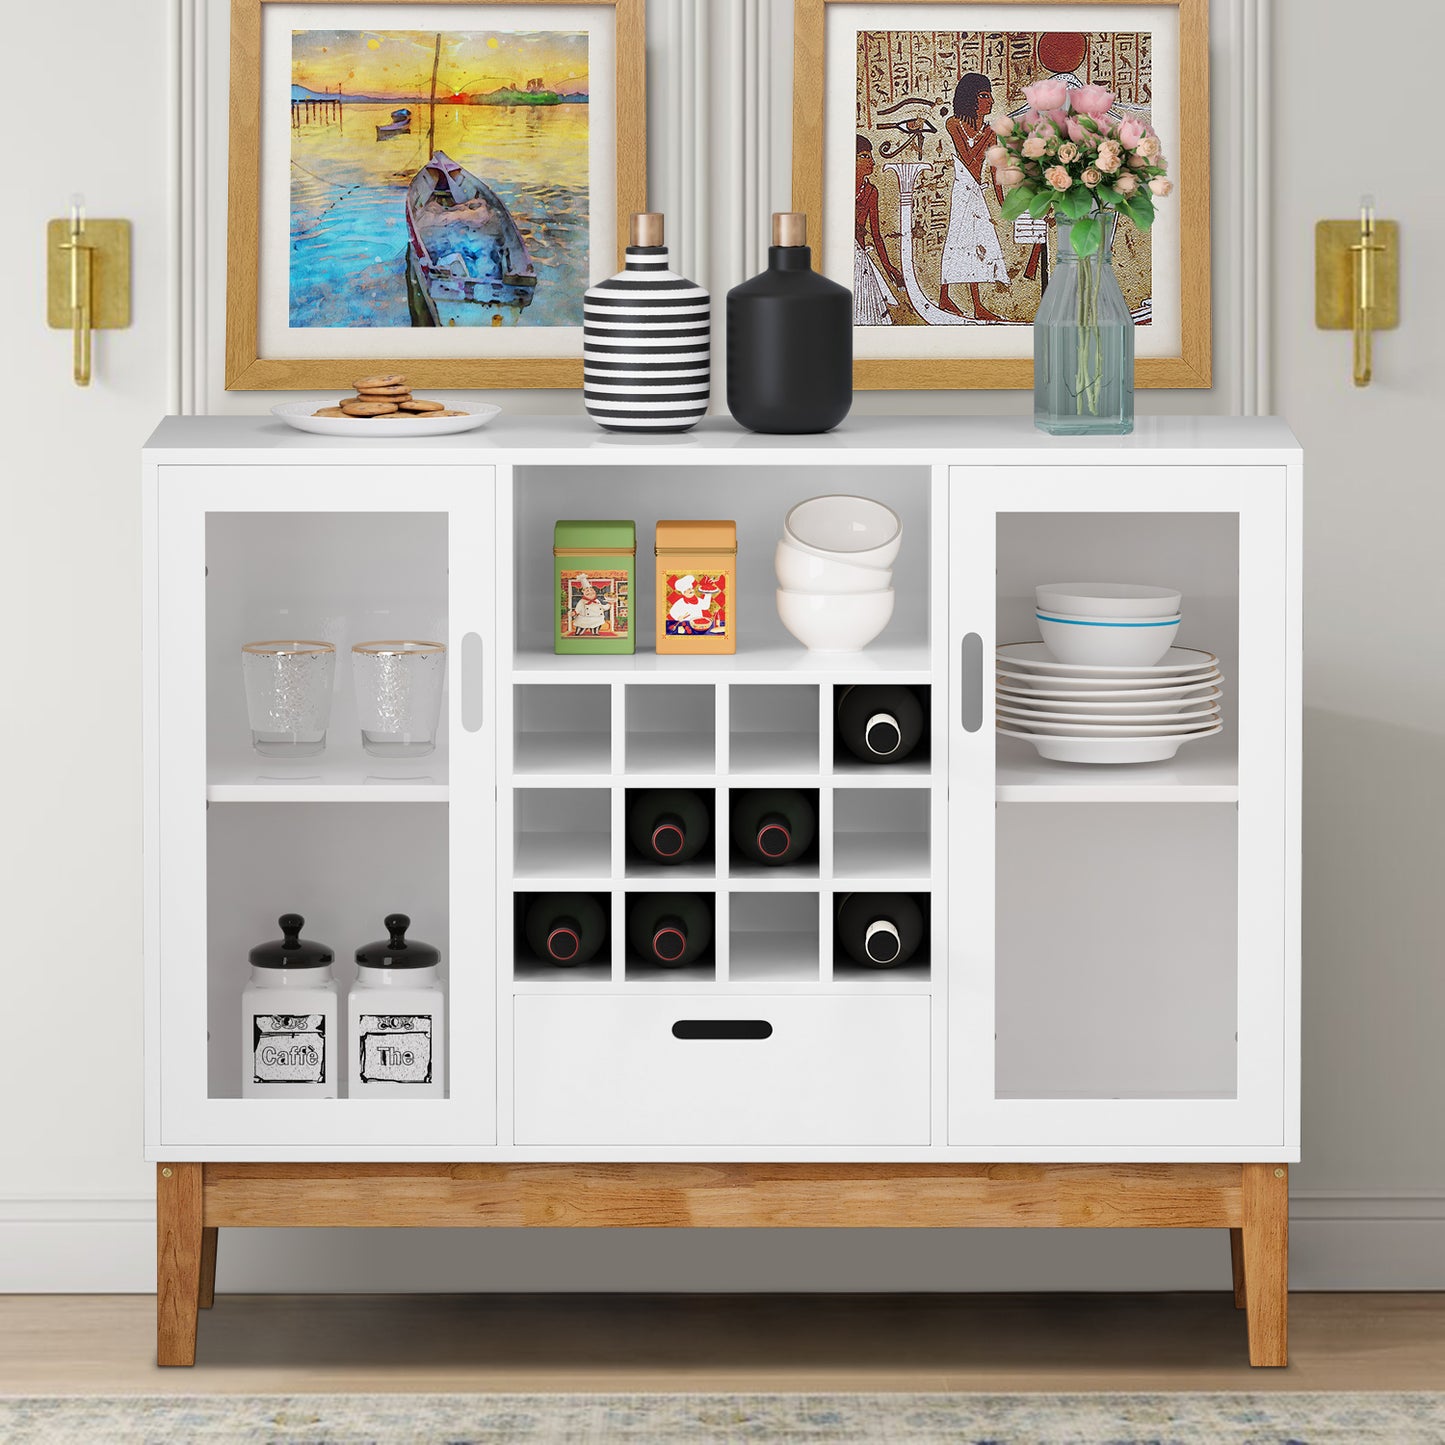 SYNGAR White Buffet Cabinet, Wood Sideboard Storage Cabinet with drawers and wine shelf for Living Room Dining Room Kitchen